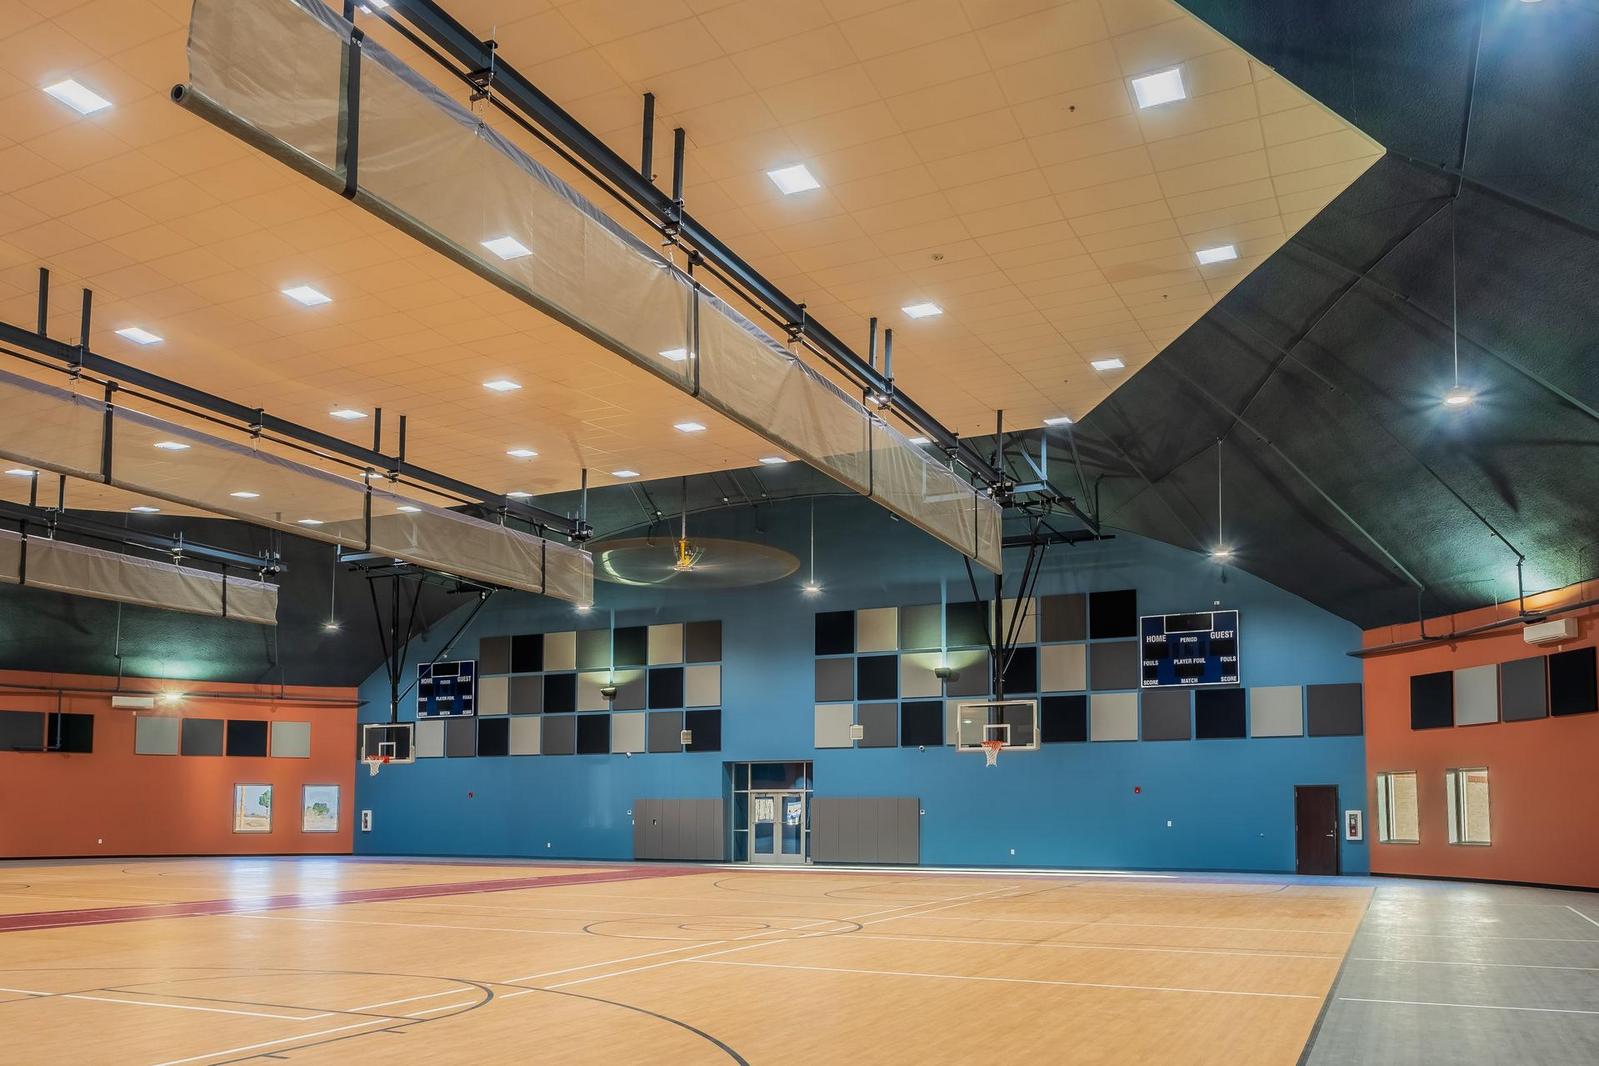 Basketball courts in gymnasium dome.